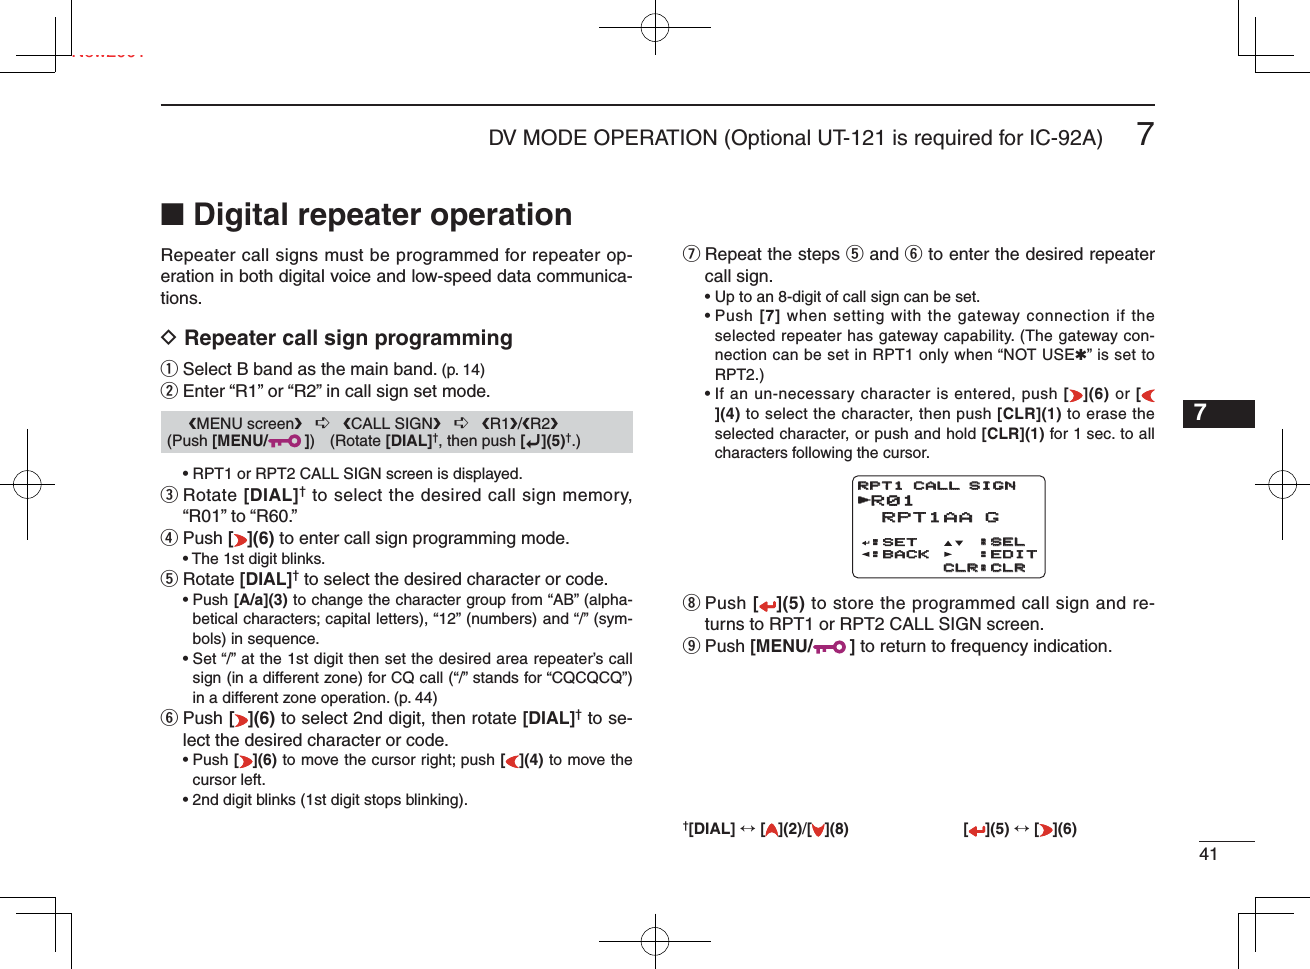 417DV MODE OPERATION (Optional UT-121 is required for IC-92A)New20017■ Digital repeater operationRepeater call signs must be programmed for repeater op-eration in both digital voice and low-speed data communica-tions.D Repeater call sign programmingq Select B band as the main band. (p. 14)w Enter “R1” or “R2” in call sign set mode.   • RPT1 or RPT2 CALL SIGN screen is displayed.e  Rotate [DIAL]† to select the desired call sign memory, “R01” to “R60.” r Push [](6) to enter call sign programming mode.  • The 1st digit blinks.t  Rotate [DIAL]† to select the desired character or code. •  Push [A/a](3) to change the character group from “AB” (alpha-betical characters; capital letters), “12” (numbers) and “/” (sym-bols) in sequence. •  Set “/” at the 1st digit then set the desired area repeater’s call sign (in a different zone) for CQ call (“/” stands for “CQCQCQ”) in a different zone operation. (p. 44)y  Push [ ](6) to select 2nd digit, then rotate [DIAL]† to se-lect the desired character or code. •  Push [](6) to move the cursor right; push [](4) to move the cursor left.  • 2nd digit blinks (1st digit stops blinking).u  Repeat the steps t and y to enter the desired repeater call sign.  • Up to an 8-digit of call sign can be set. •  Push [7] when setting with the gateway connection if the selected repeater has gateway capability. (The gateway con-nection can be set in RPT1 only when “NOT USE✱” is set to RPT2.) •  If an un-necessary character is entered, push [](6) or [](4) to select the character, then push [CLR](1) to erase the selected character, or push and hold [CLR](1) for 1 sec. to all characters following the cursor.i  Push [](5) to store the programmed call sign and re-turns to RPT1 or RPT2 CALL SIGN screen.o Push [MENU/ ] to return to frequency indication.†[DIAL] ↔ [ ](2)/[](8) [ ](5) ↔ [ ](6)1234568910111213141516171819      ❮MENU screen❯   ➪   ❮CALL SIGN❯   ➪   ❮R1❯/❮R2❯ (Push [MENU/ ]) (Rotate [DIAL]†, then push [ï](5)†.)R01 RPT1AA G RPT1AA G:SET:BACK:BACK:SEL:SEL:EDIT:EDITCLR:CLRCLR:CLRRPT1 CALL SIGNRPT1 CALL SIGNr